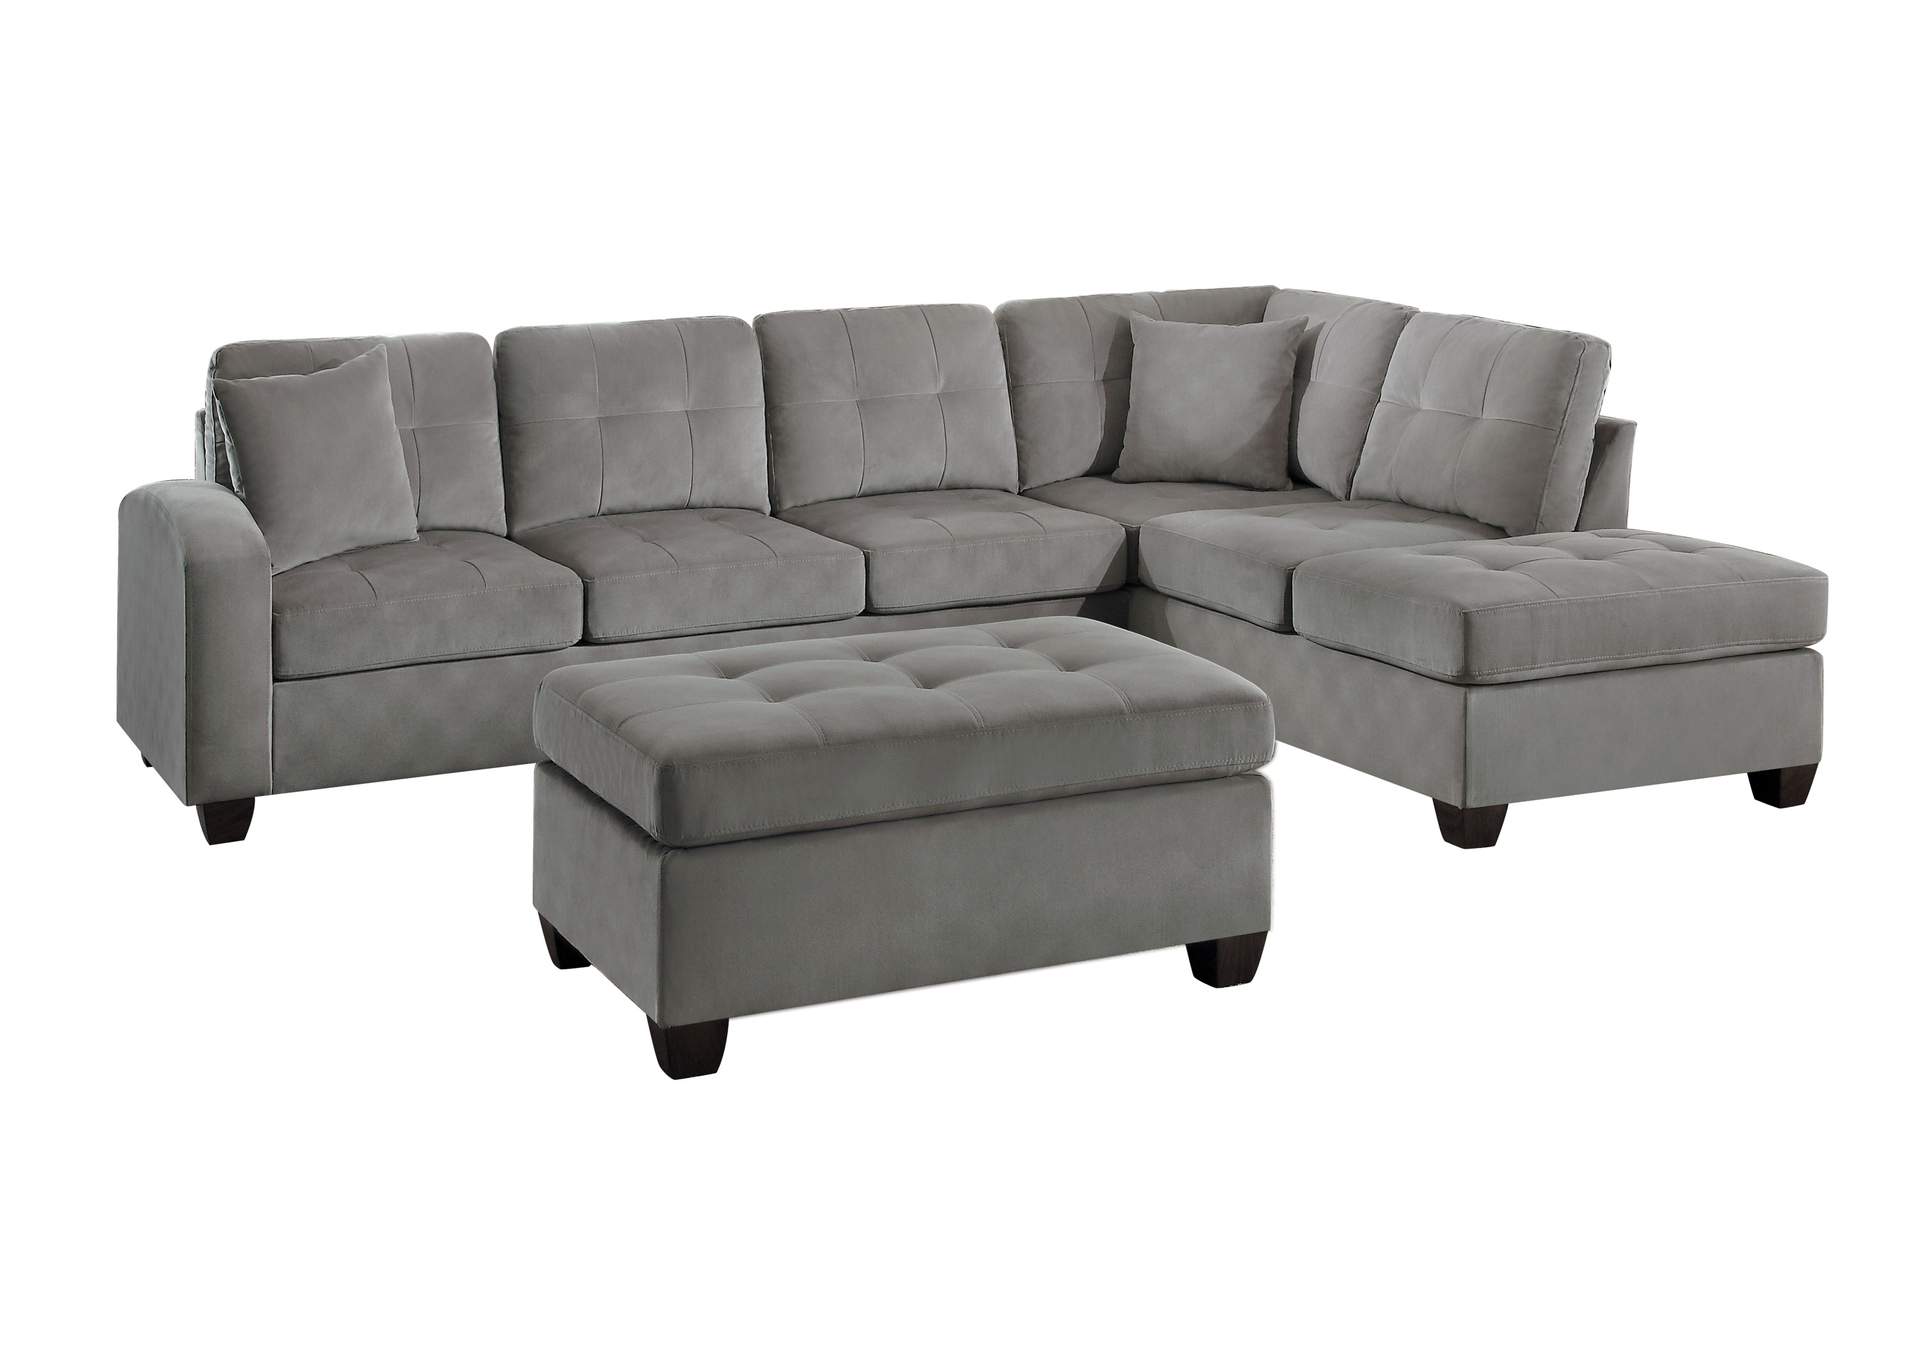 Taupe 3-Piece Reversible Sectional with Ottoman,Homelegance